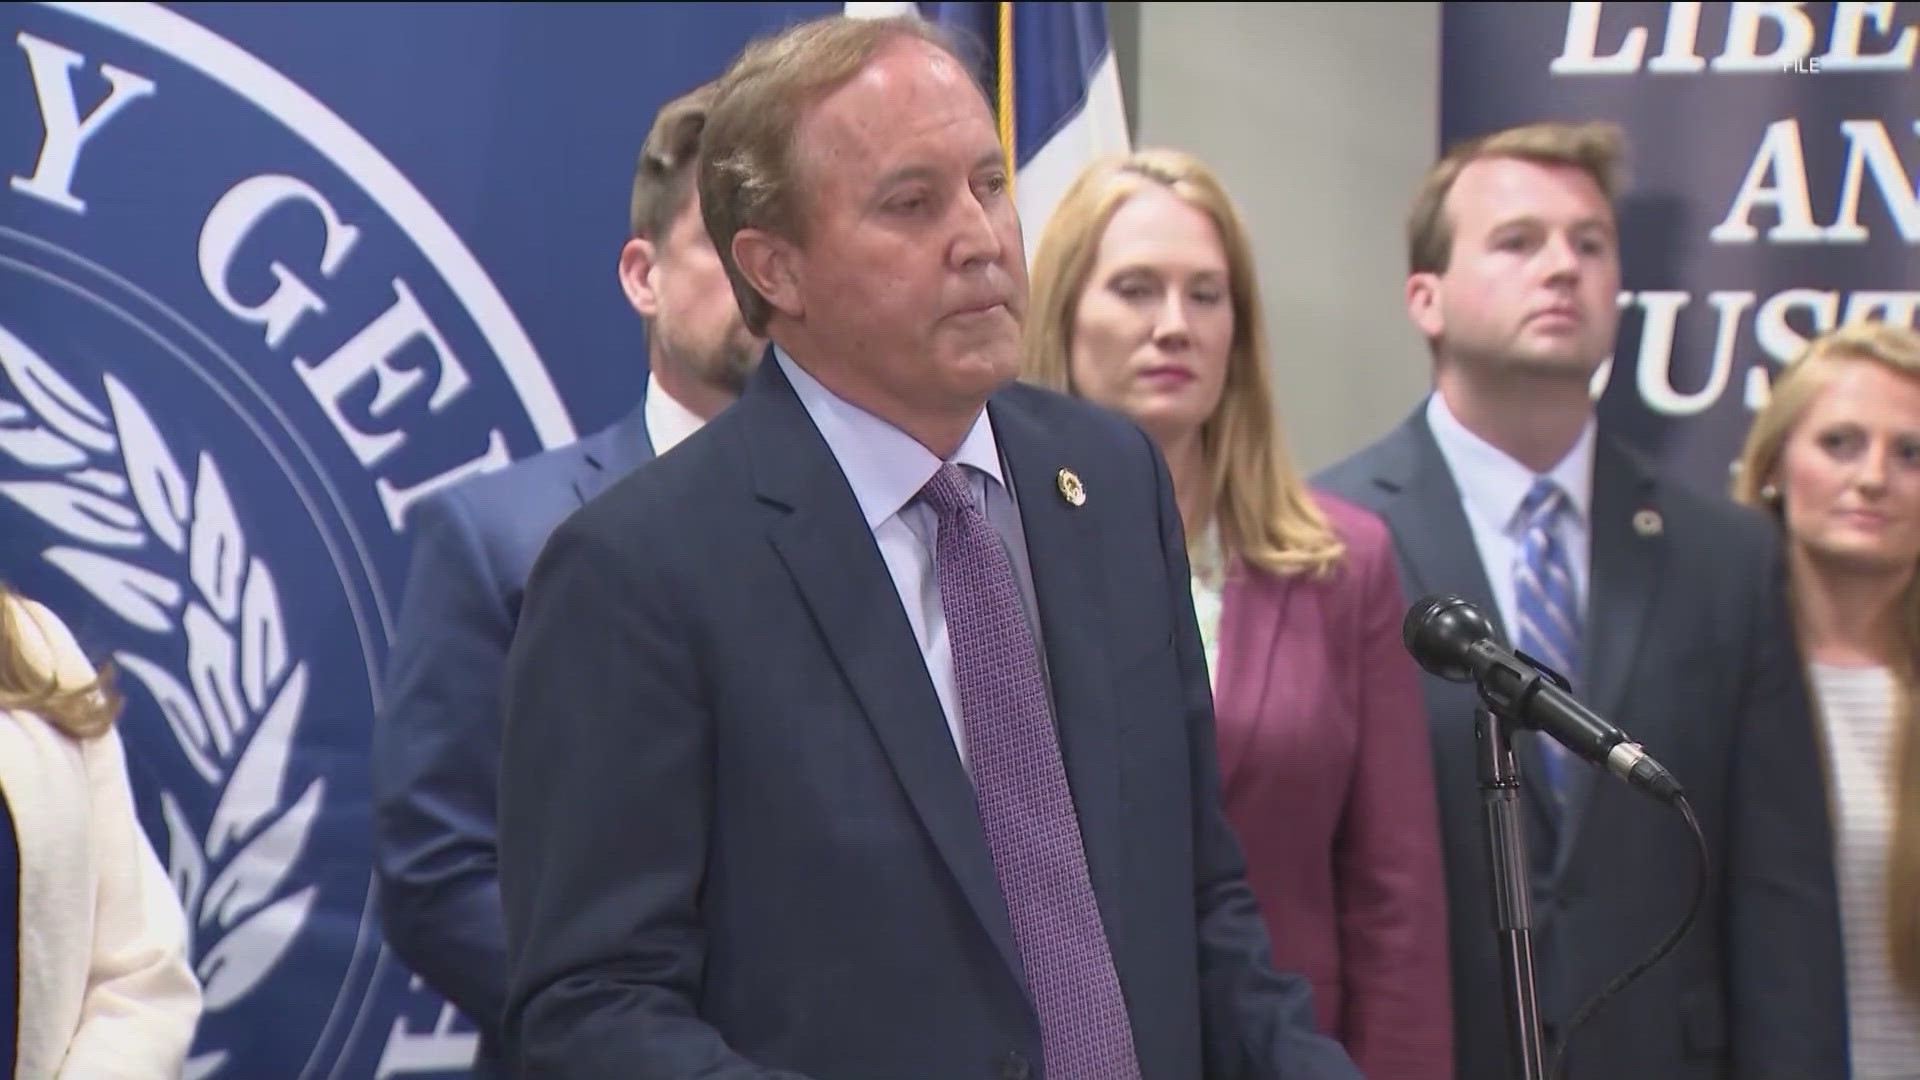 More than a dozen attorneys want the State Bar to investigate suspended Texas Attorney General Ken Paxton and potentially keep him from practicing law.